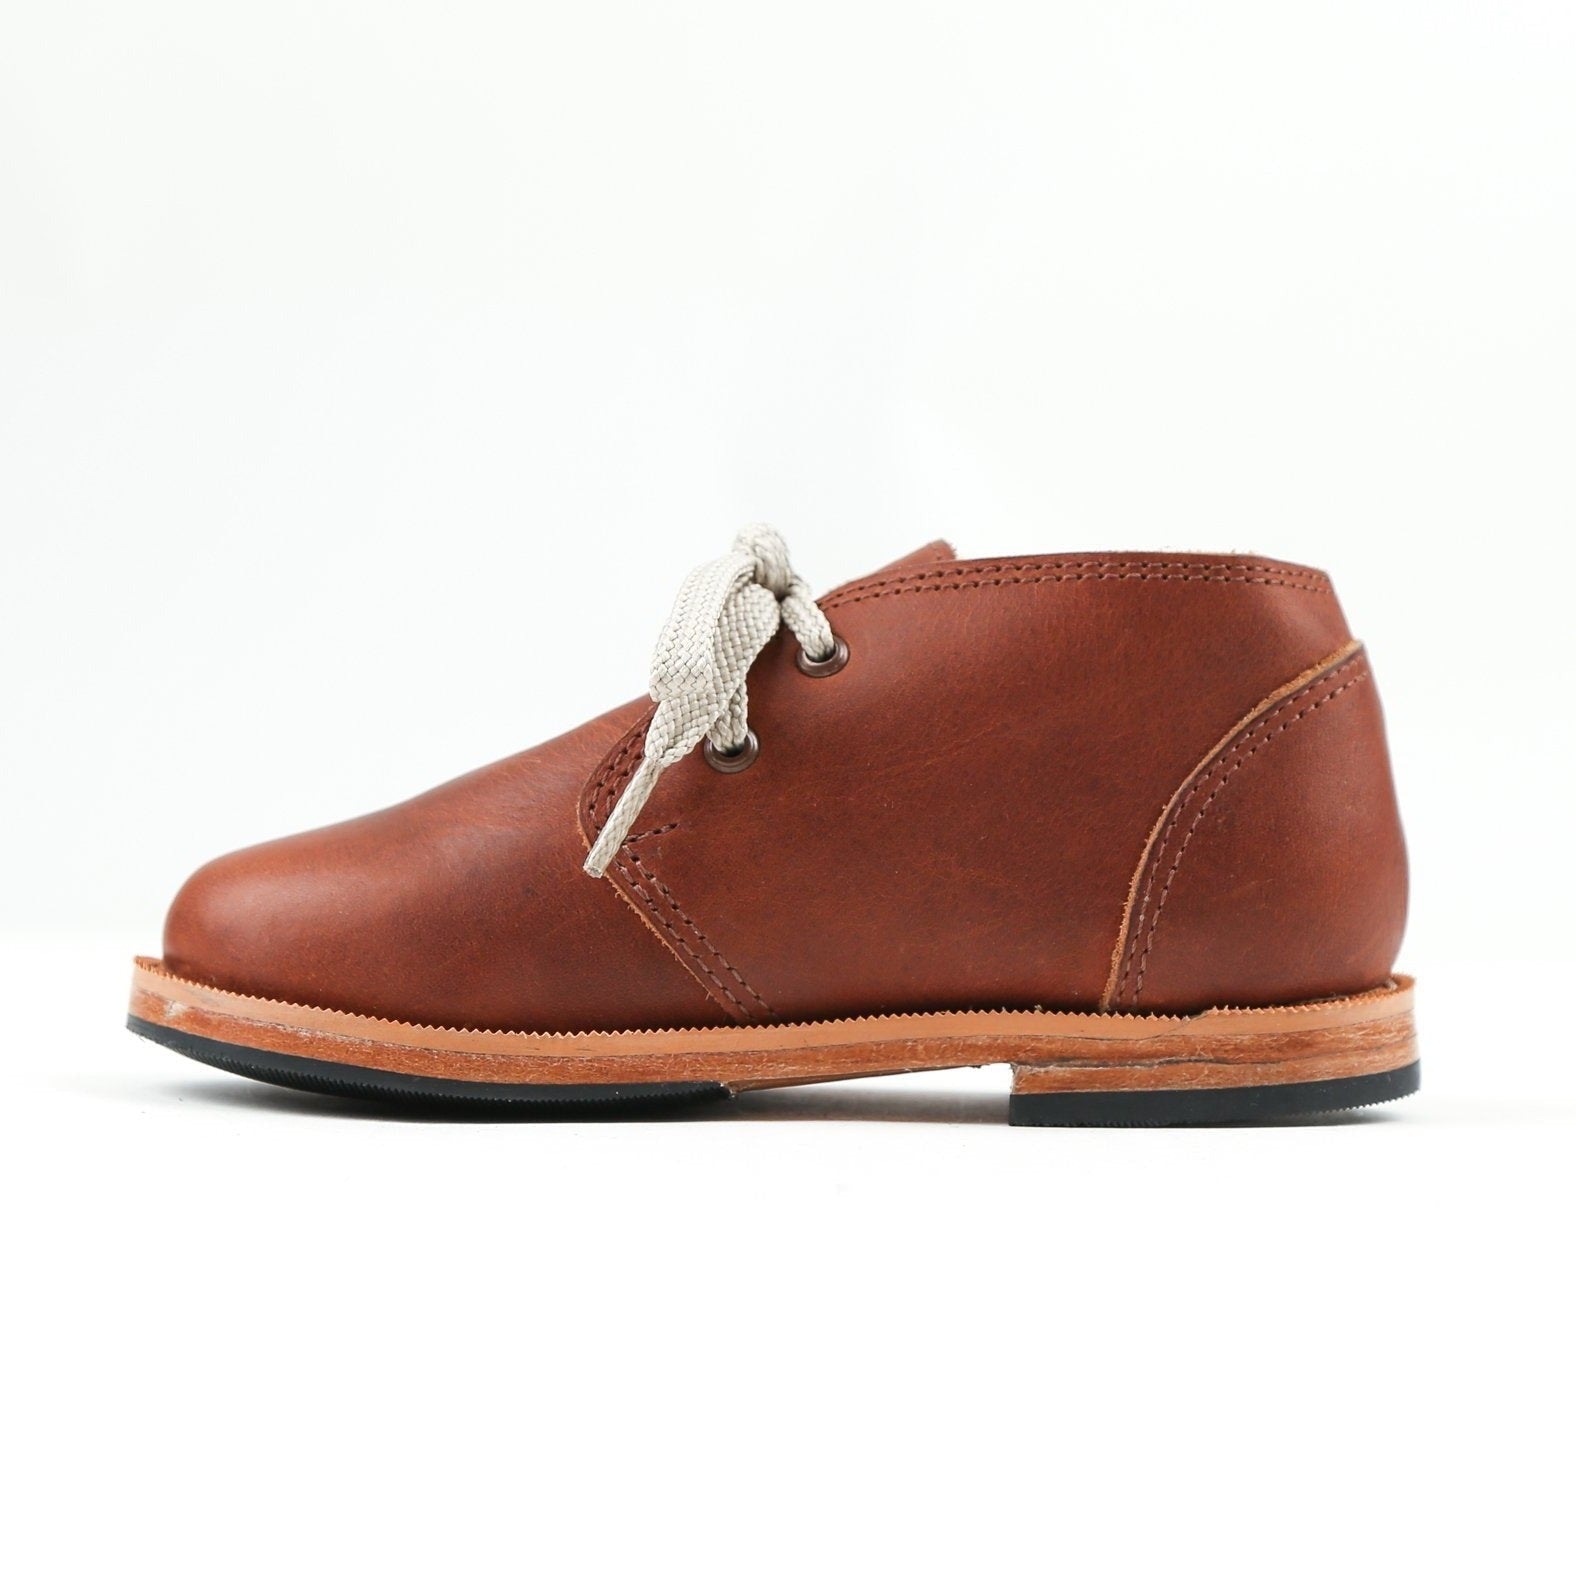 MK2010 - Chukkas Scout Shoes Brown [Children's Leather Shoes] | Sustainable Fashion made artisans